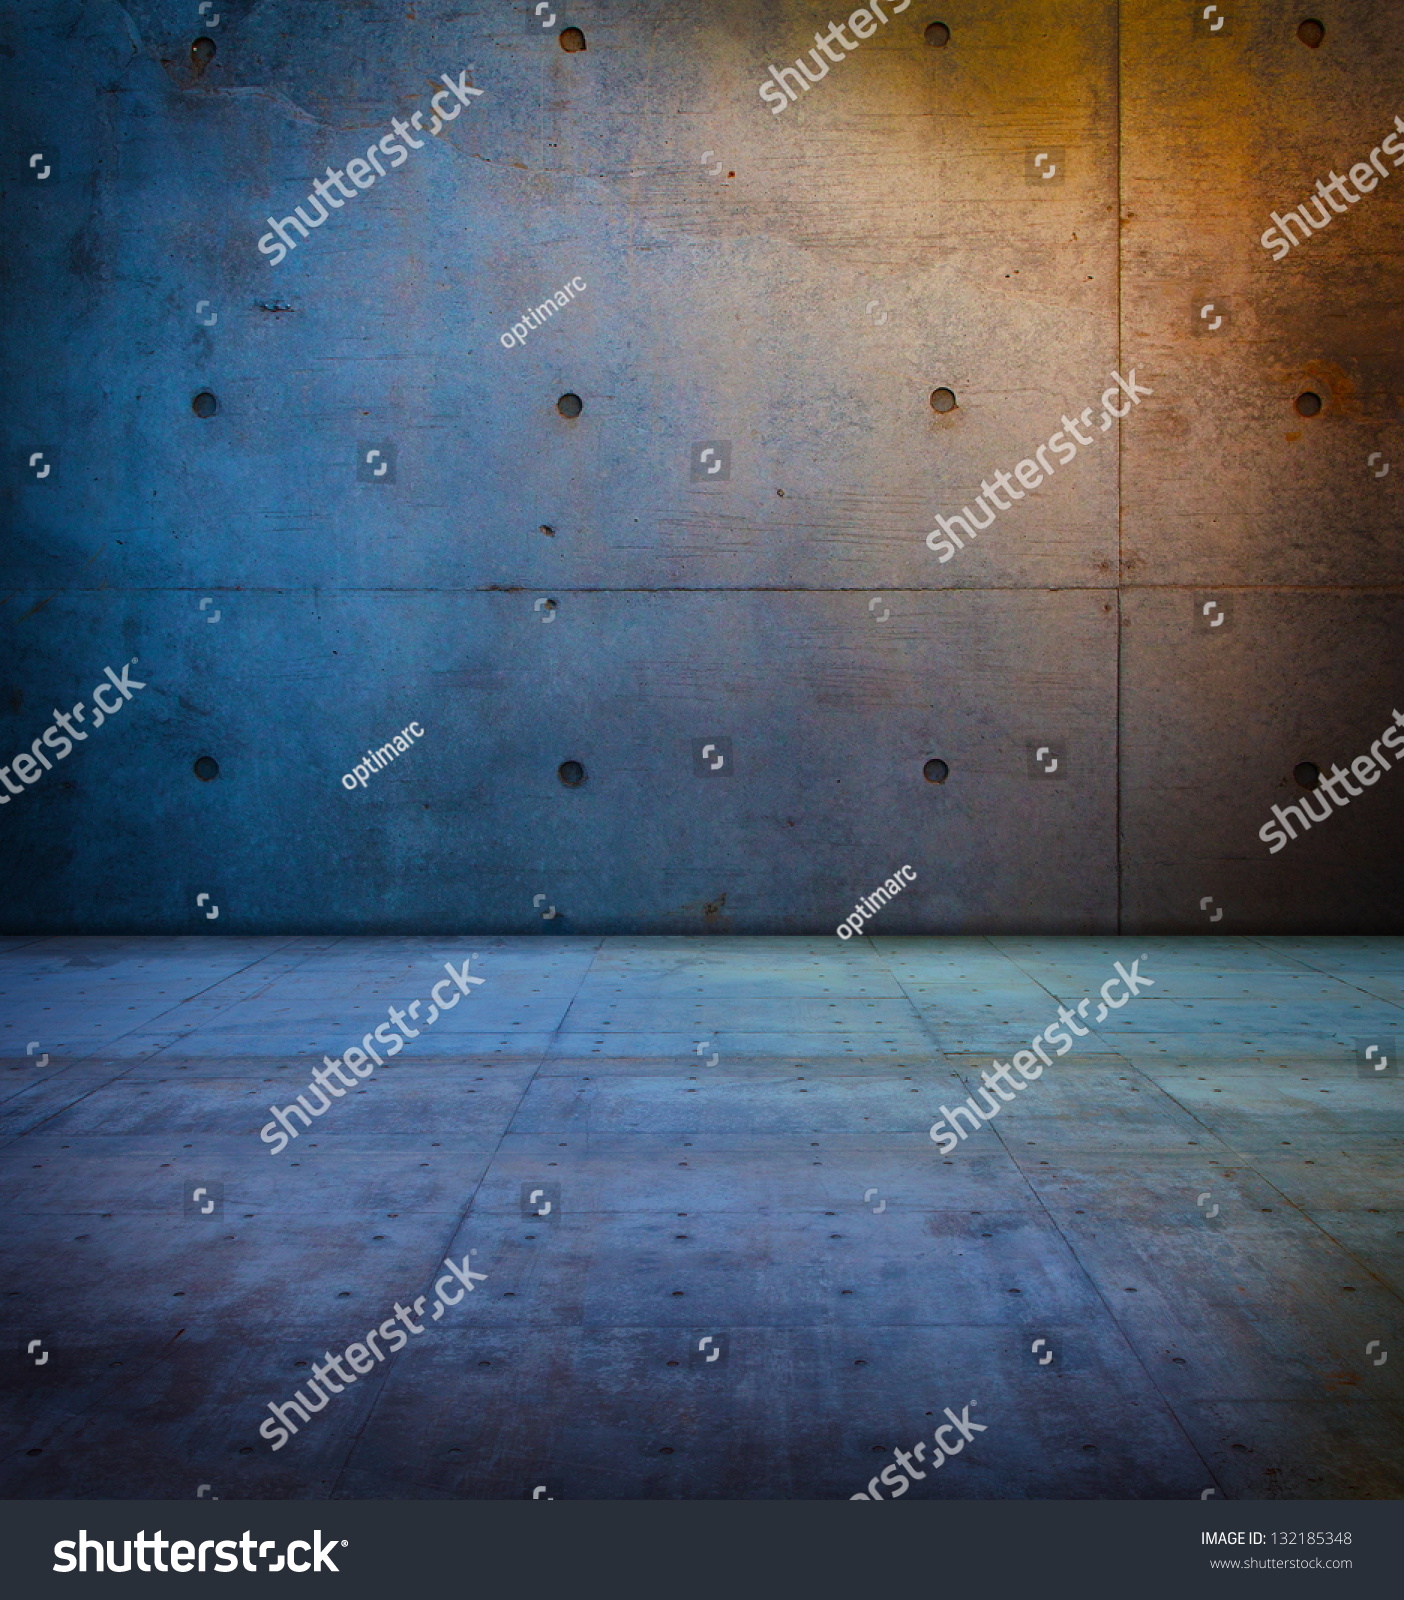 Raw Concrete Space In Sunset Like Ambient Lighting. Stock Photo